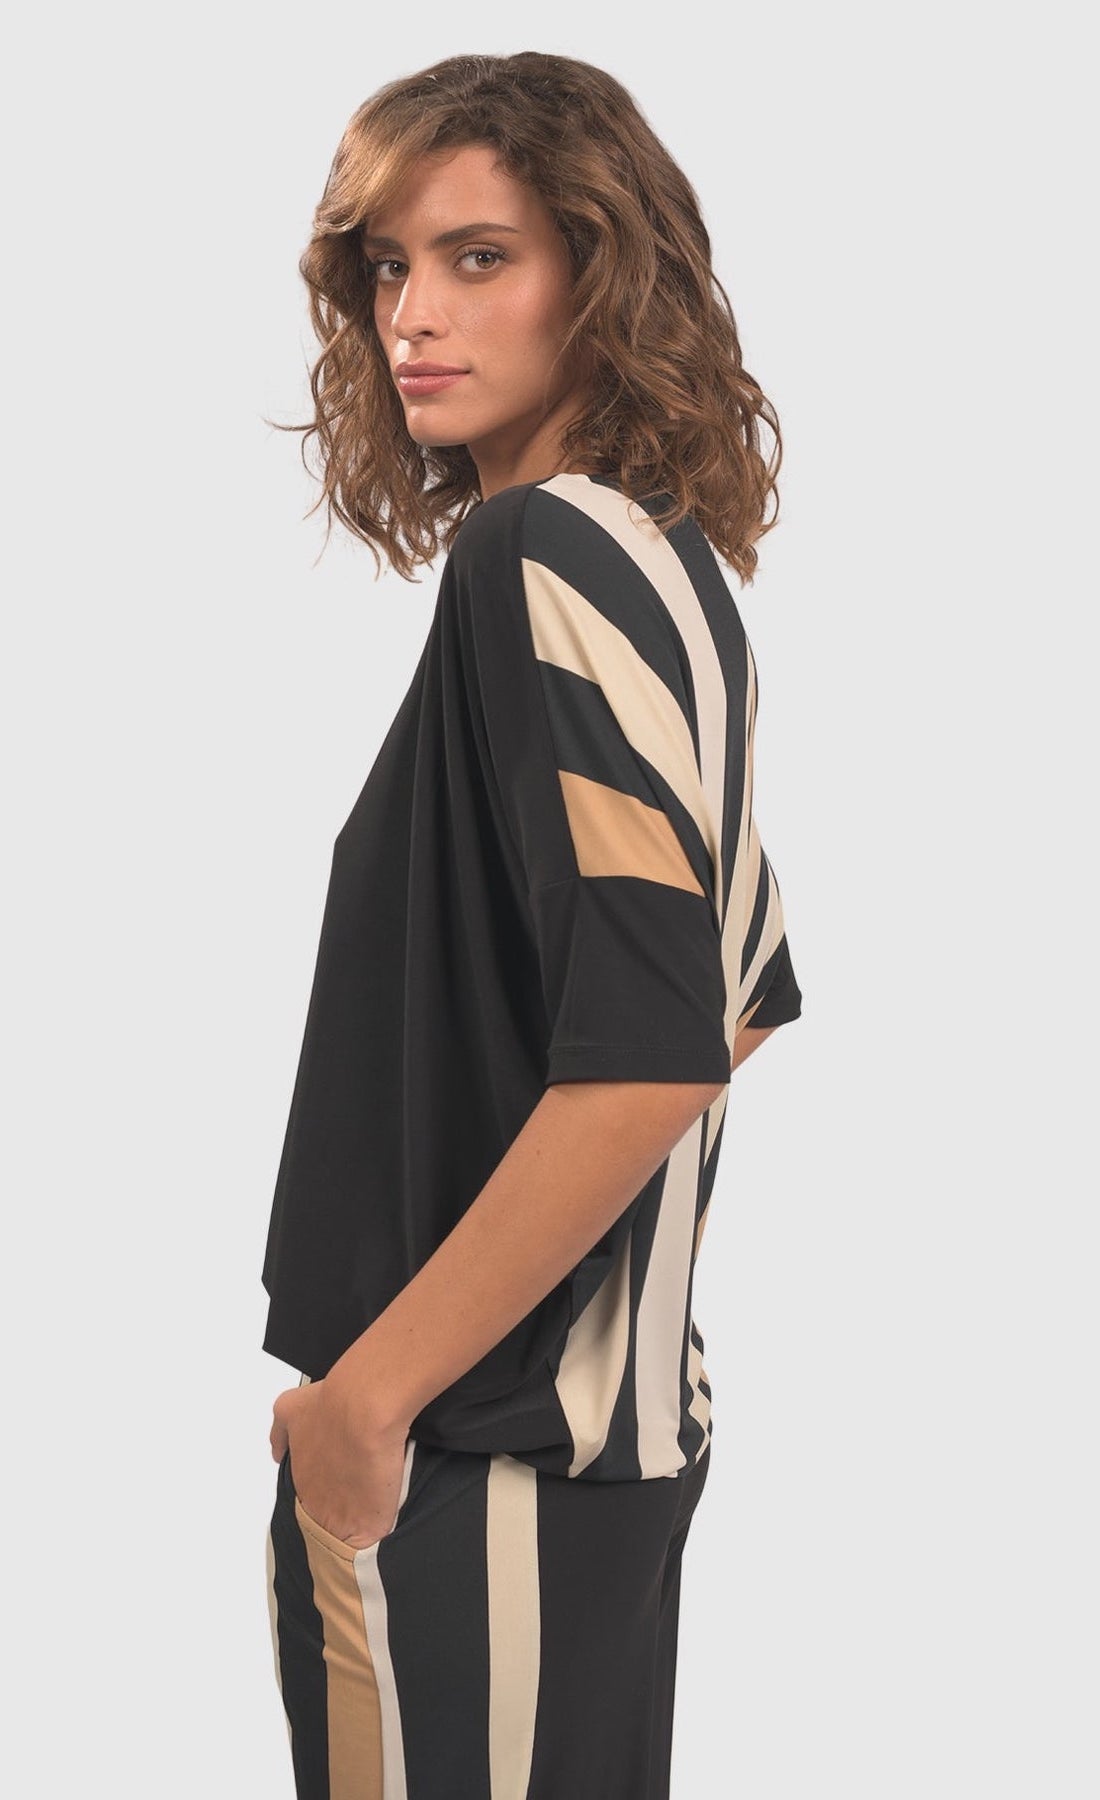 left side top half view of a woman wearing the alembika drapey dolman sunrise top. This top is black in the front and striped in the back with white and tan stripes. The top has elbow-length sleeves.